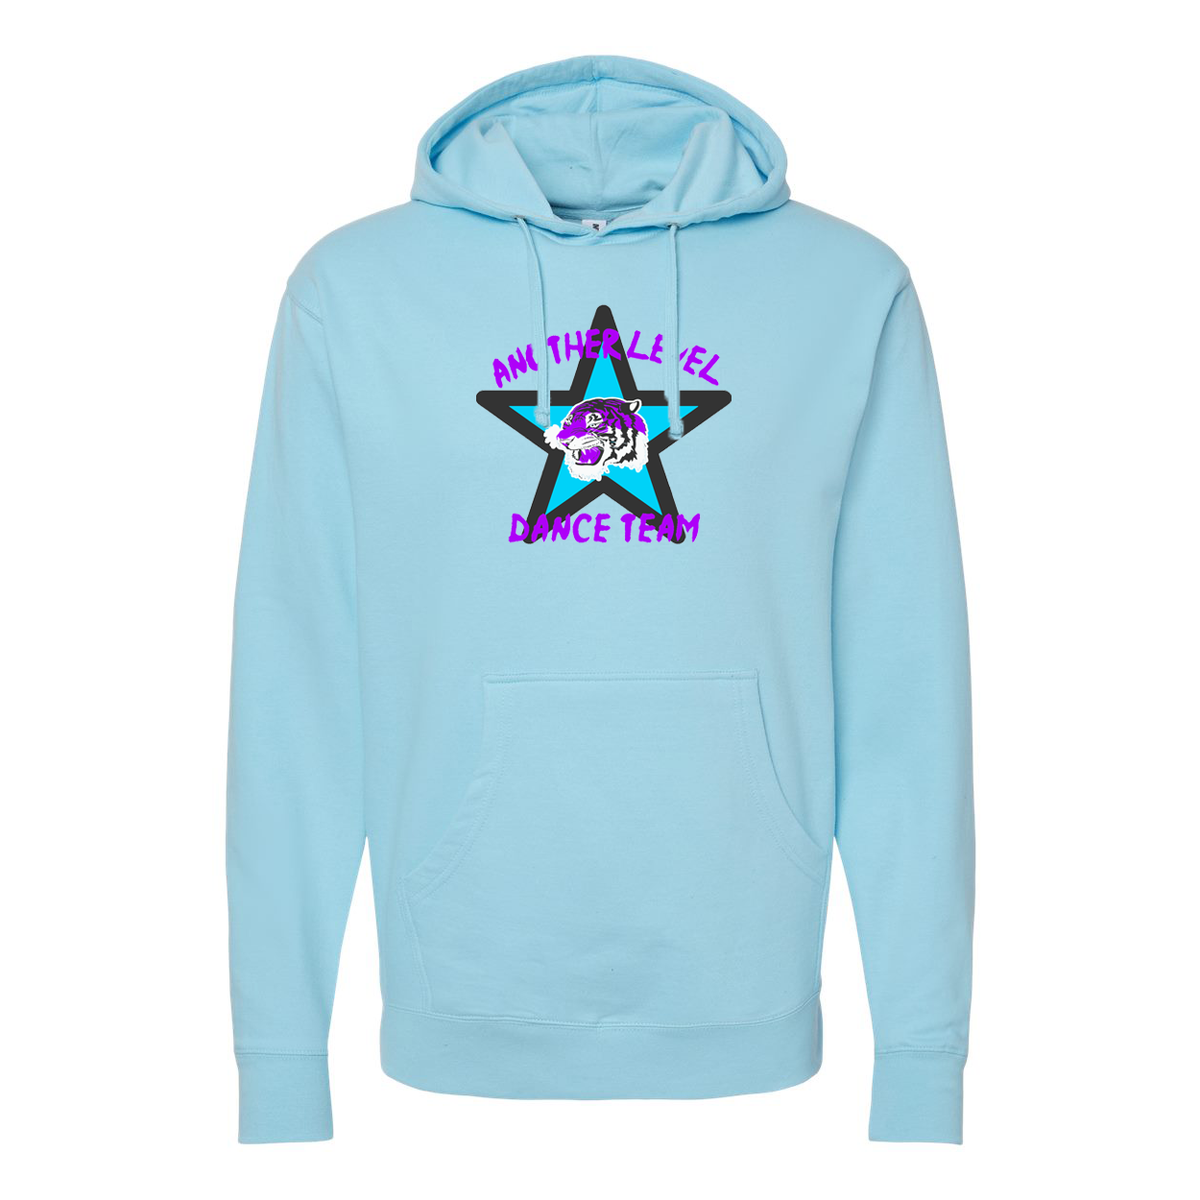 Another Level Dance Team Midweight Hoodie